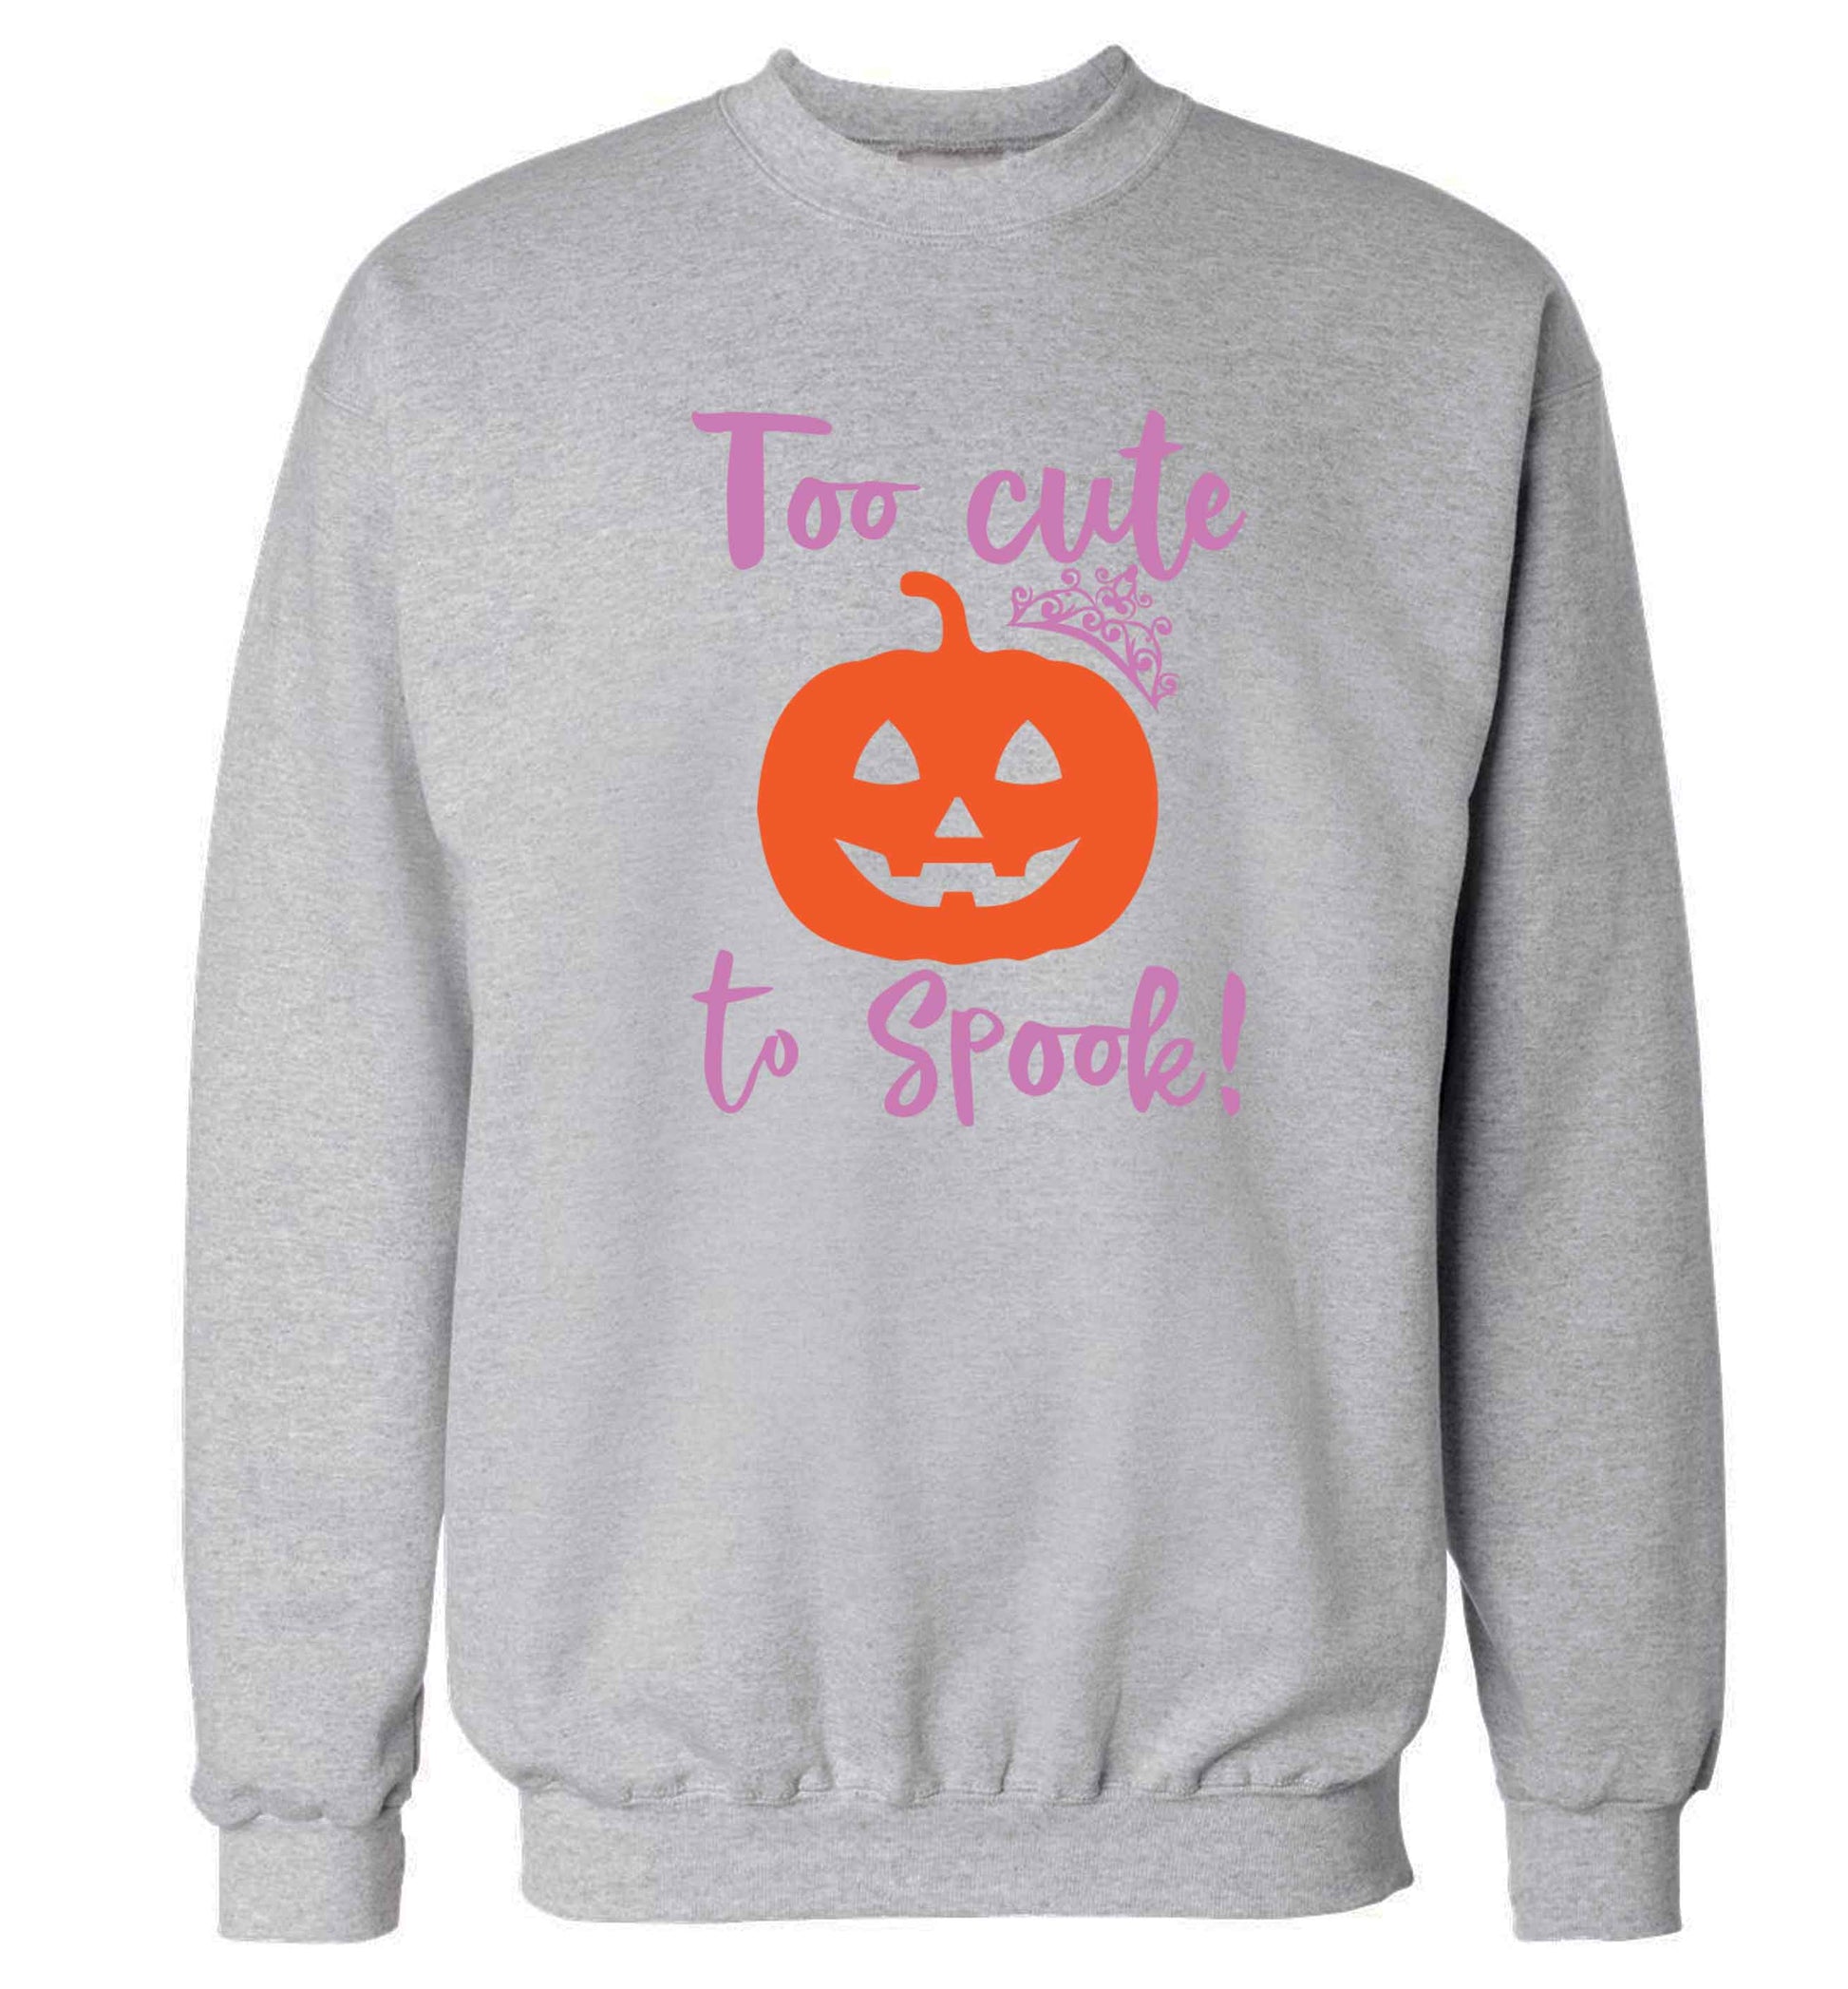 Too cute to spook! Adult's unisex grey Sweater 2XL